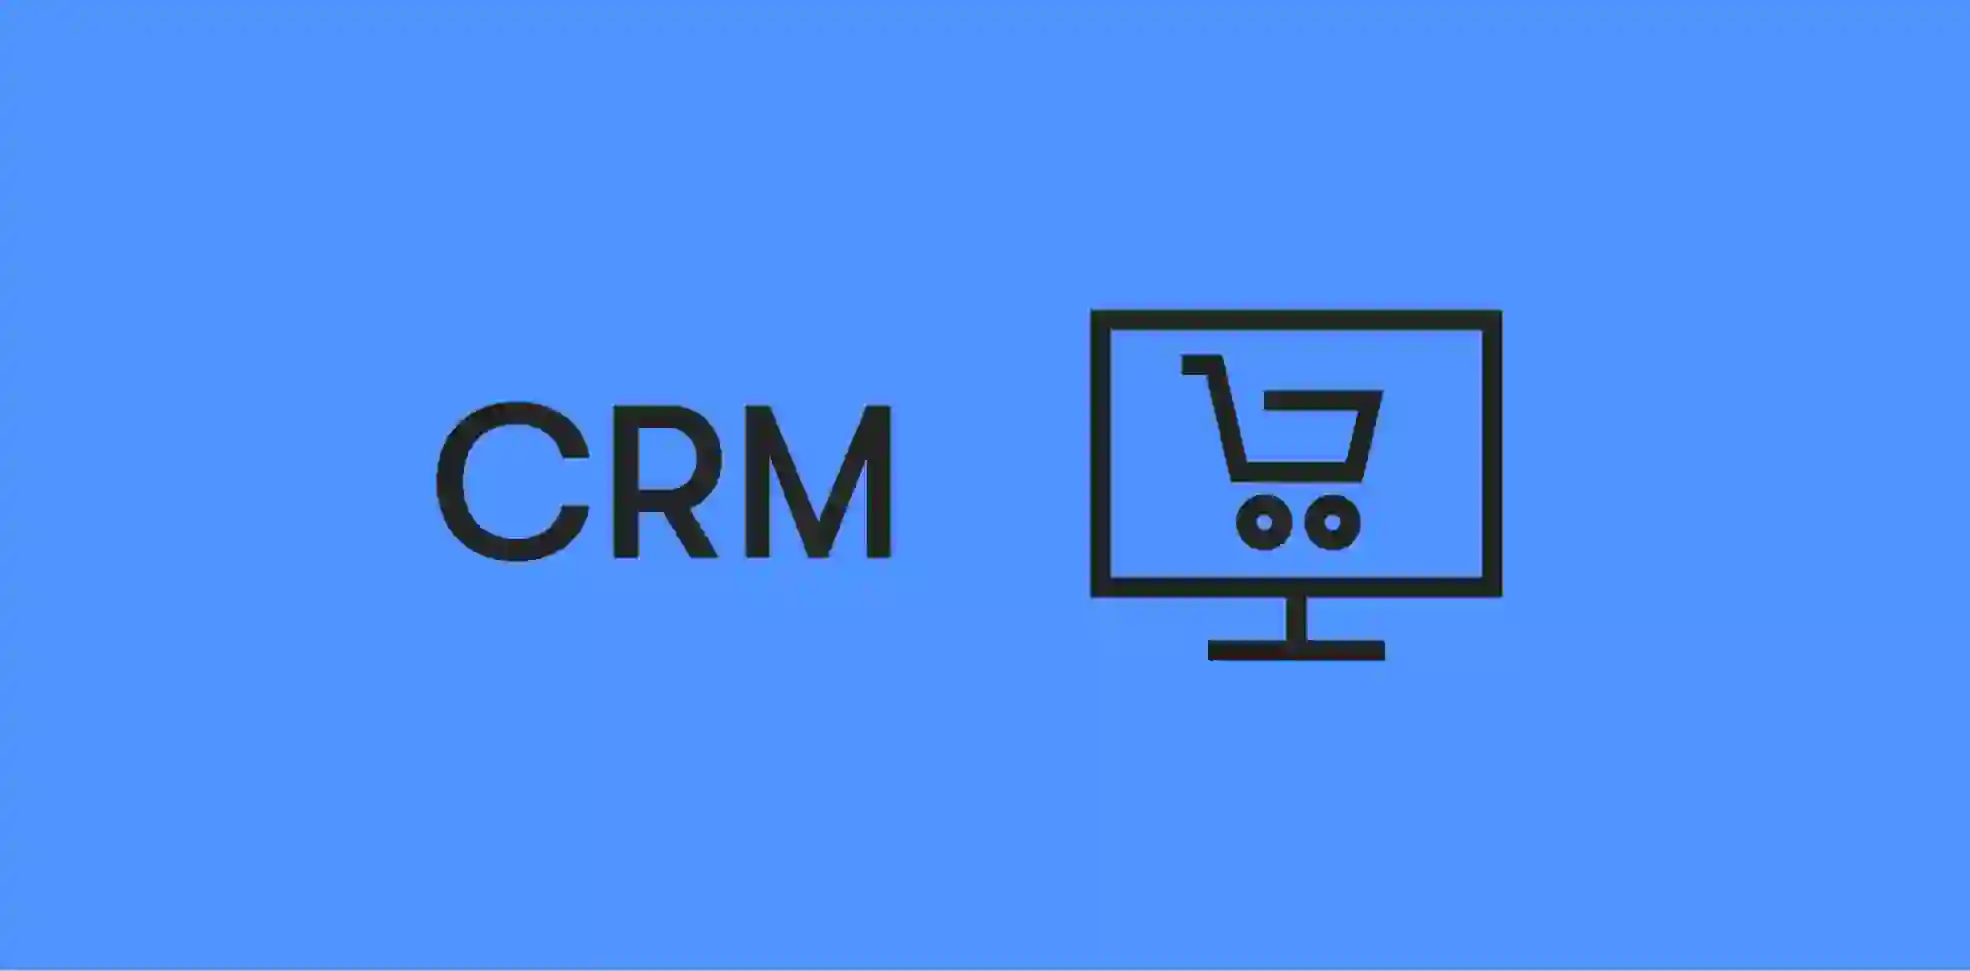 an abbreviation CRM and an icon of monitor on blue background